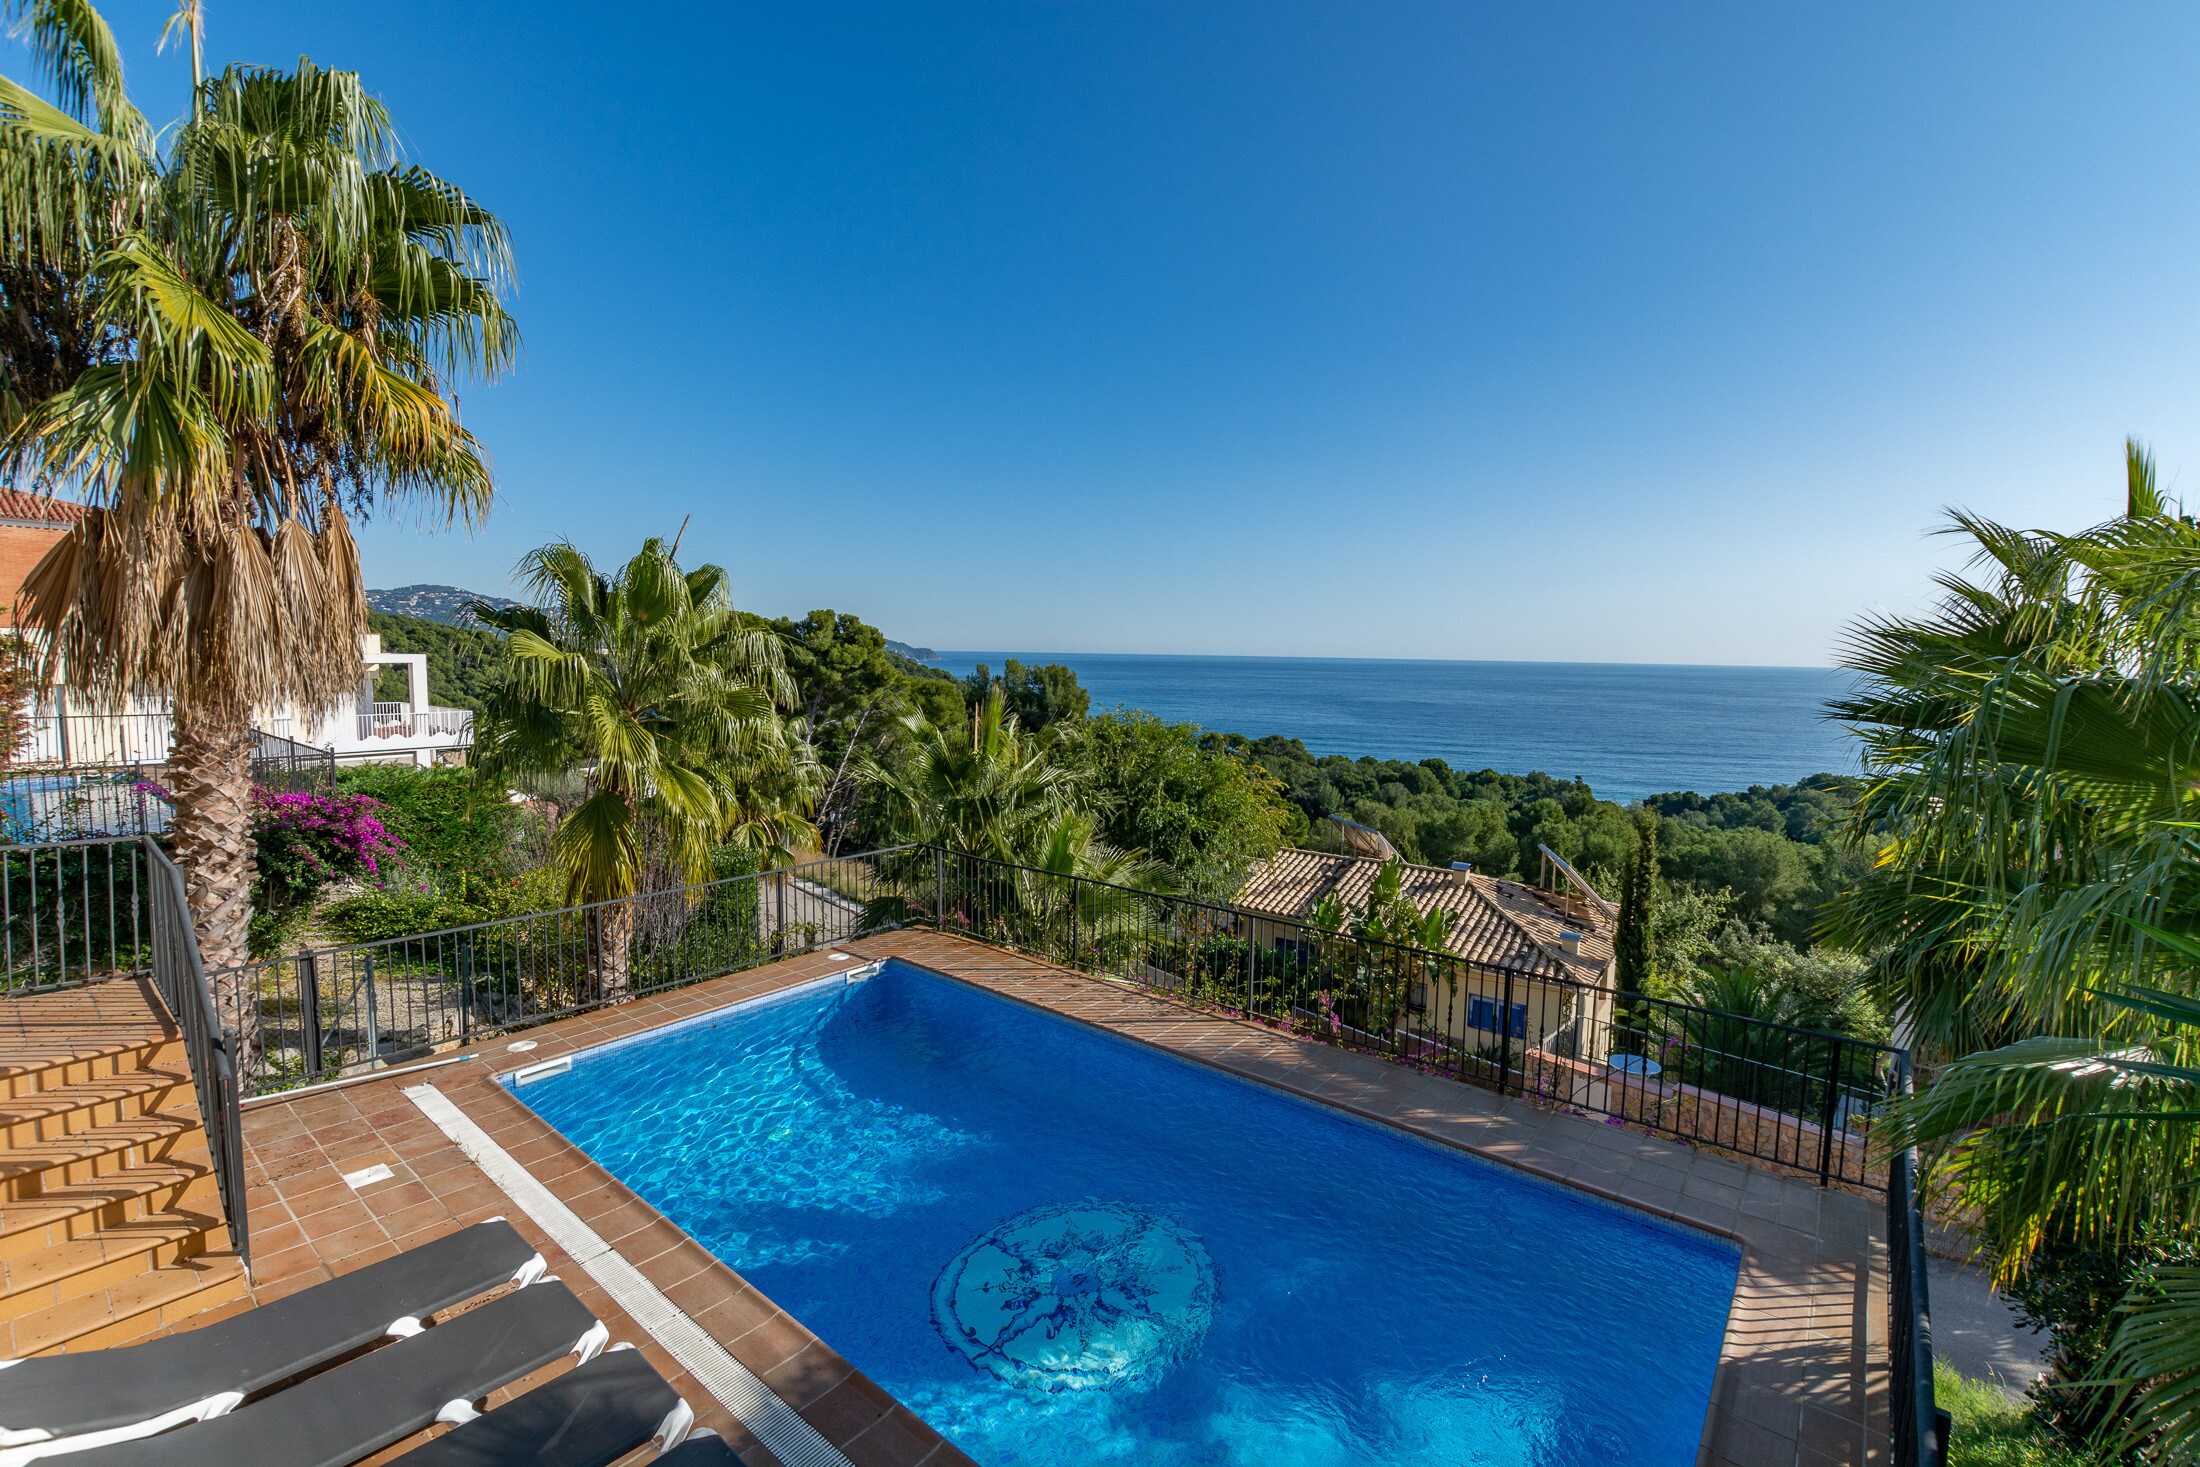 Property Image 2 - Amazing large villa with great sea view from the swimming pool